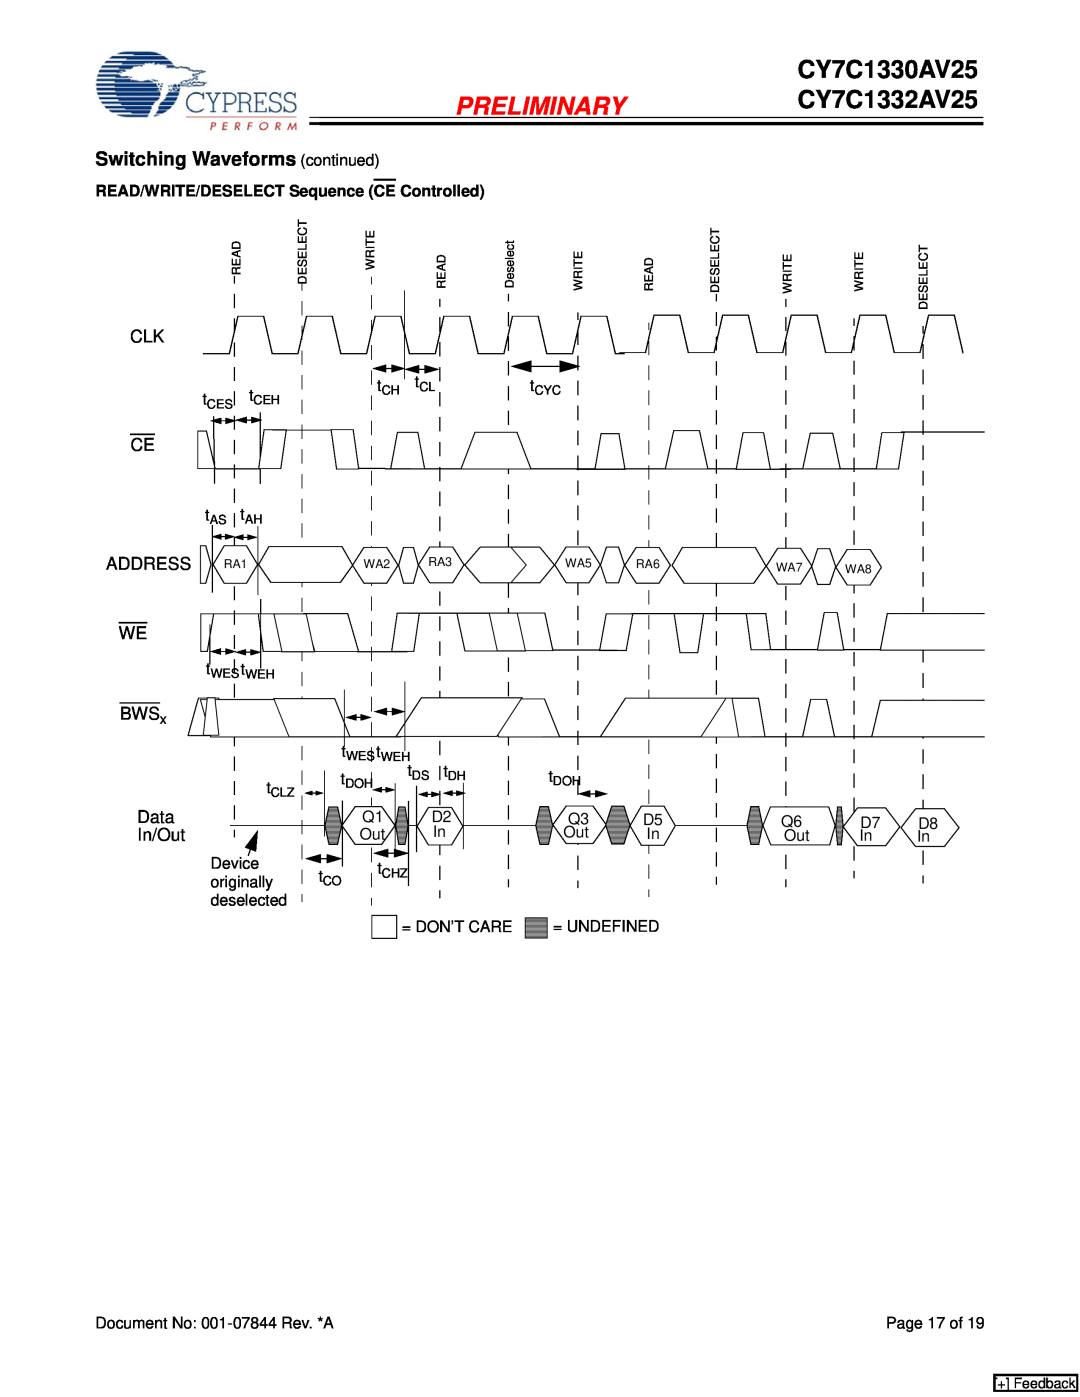 Cypress manual Switching Waveforms continued, CY7C1330AV25, PRELIMINARYCY7C1332AV25, ADDRESS RA1, Data, In/Out 